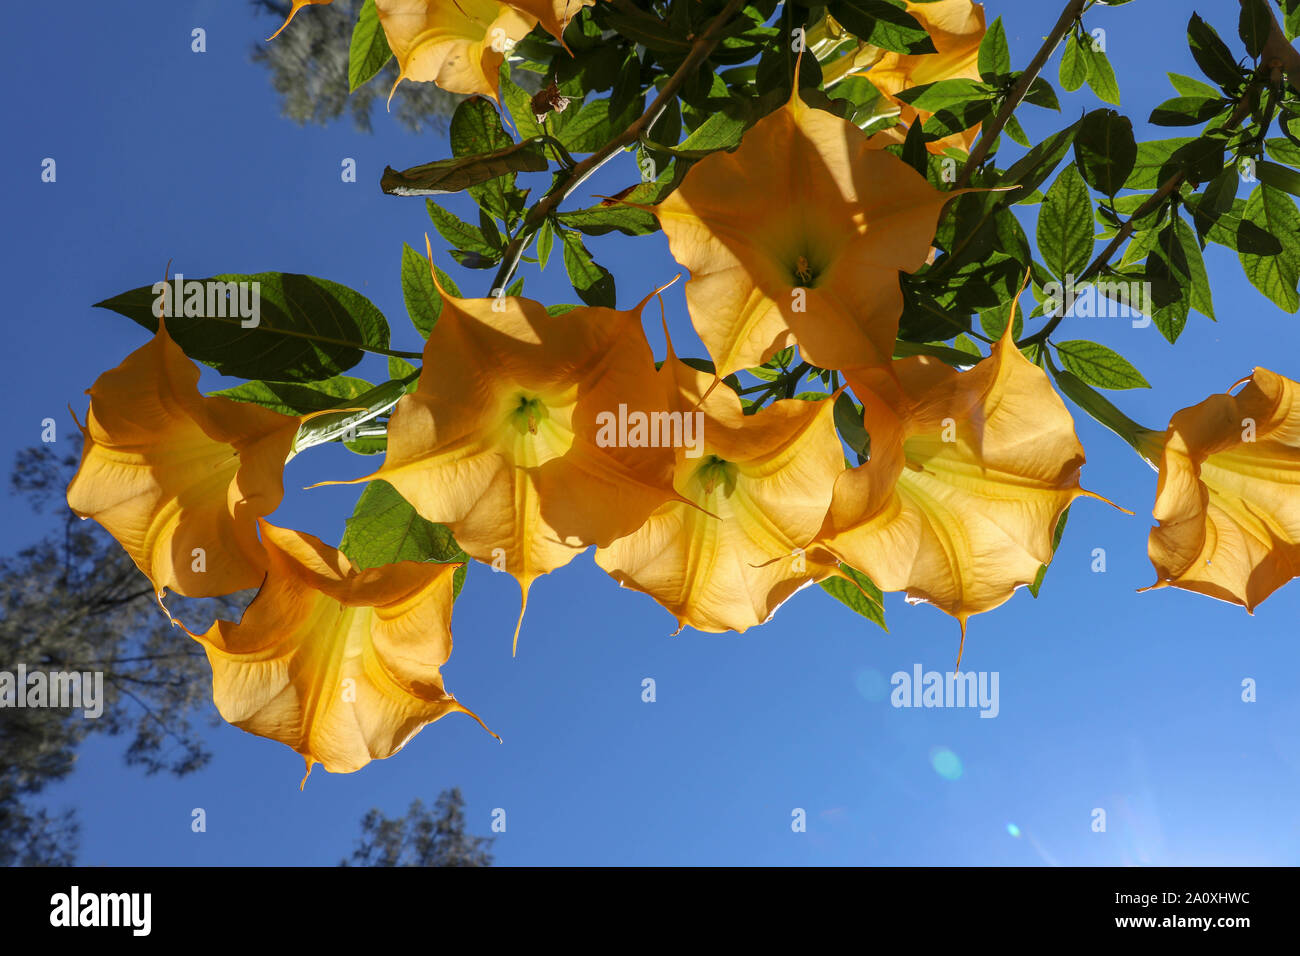 Angels Trumpets (Datura), Solanaceae, Brugmansia, the large, fragrant flowers give them their common name of angel's trumpets. Stock Photo